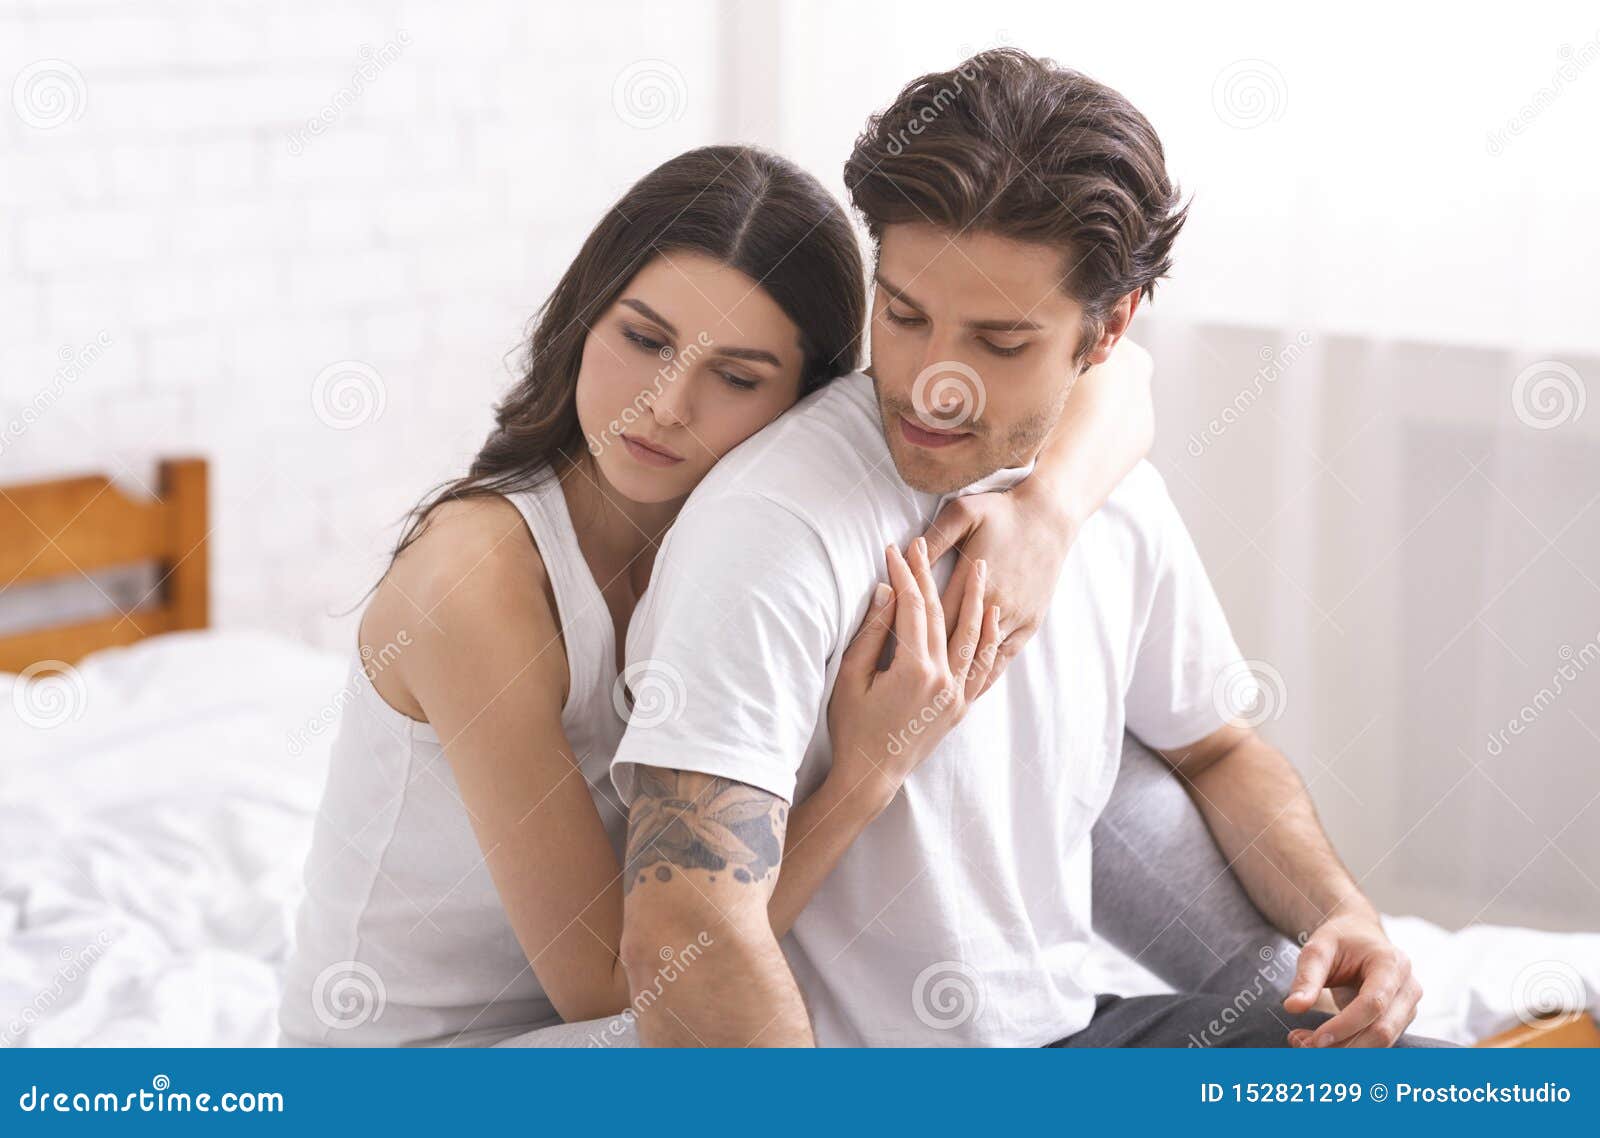 Sweet Couple Embracing in Bedroom, Sitting Together on Bed Stock ...